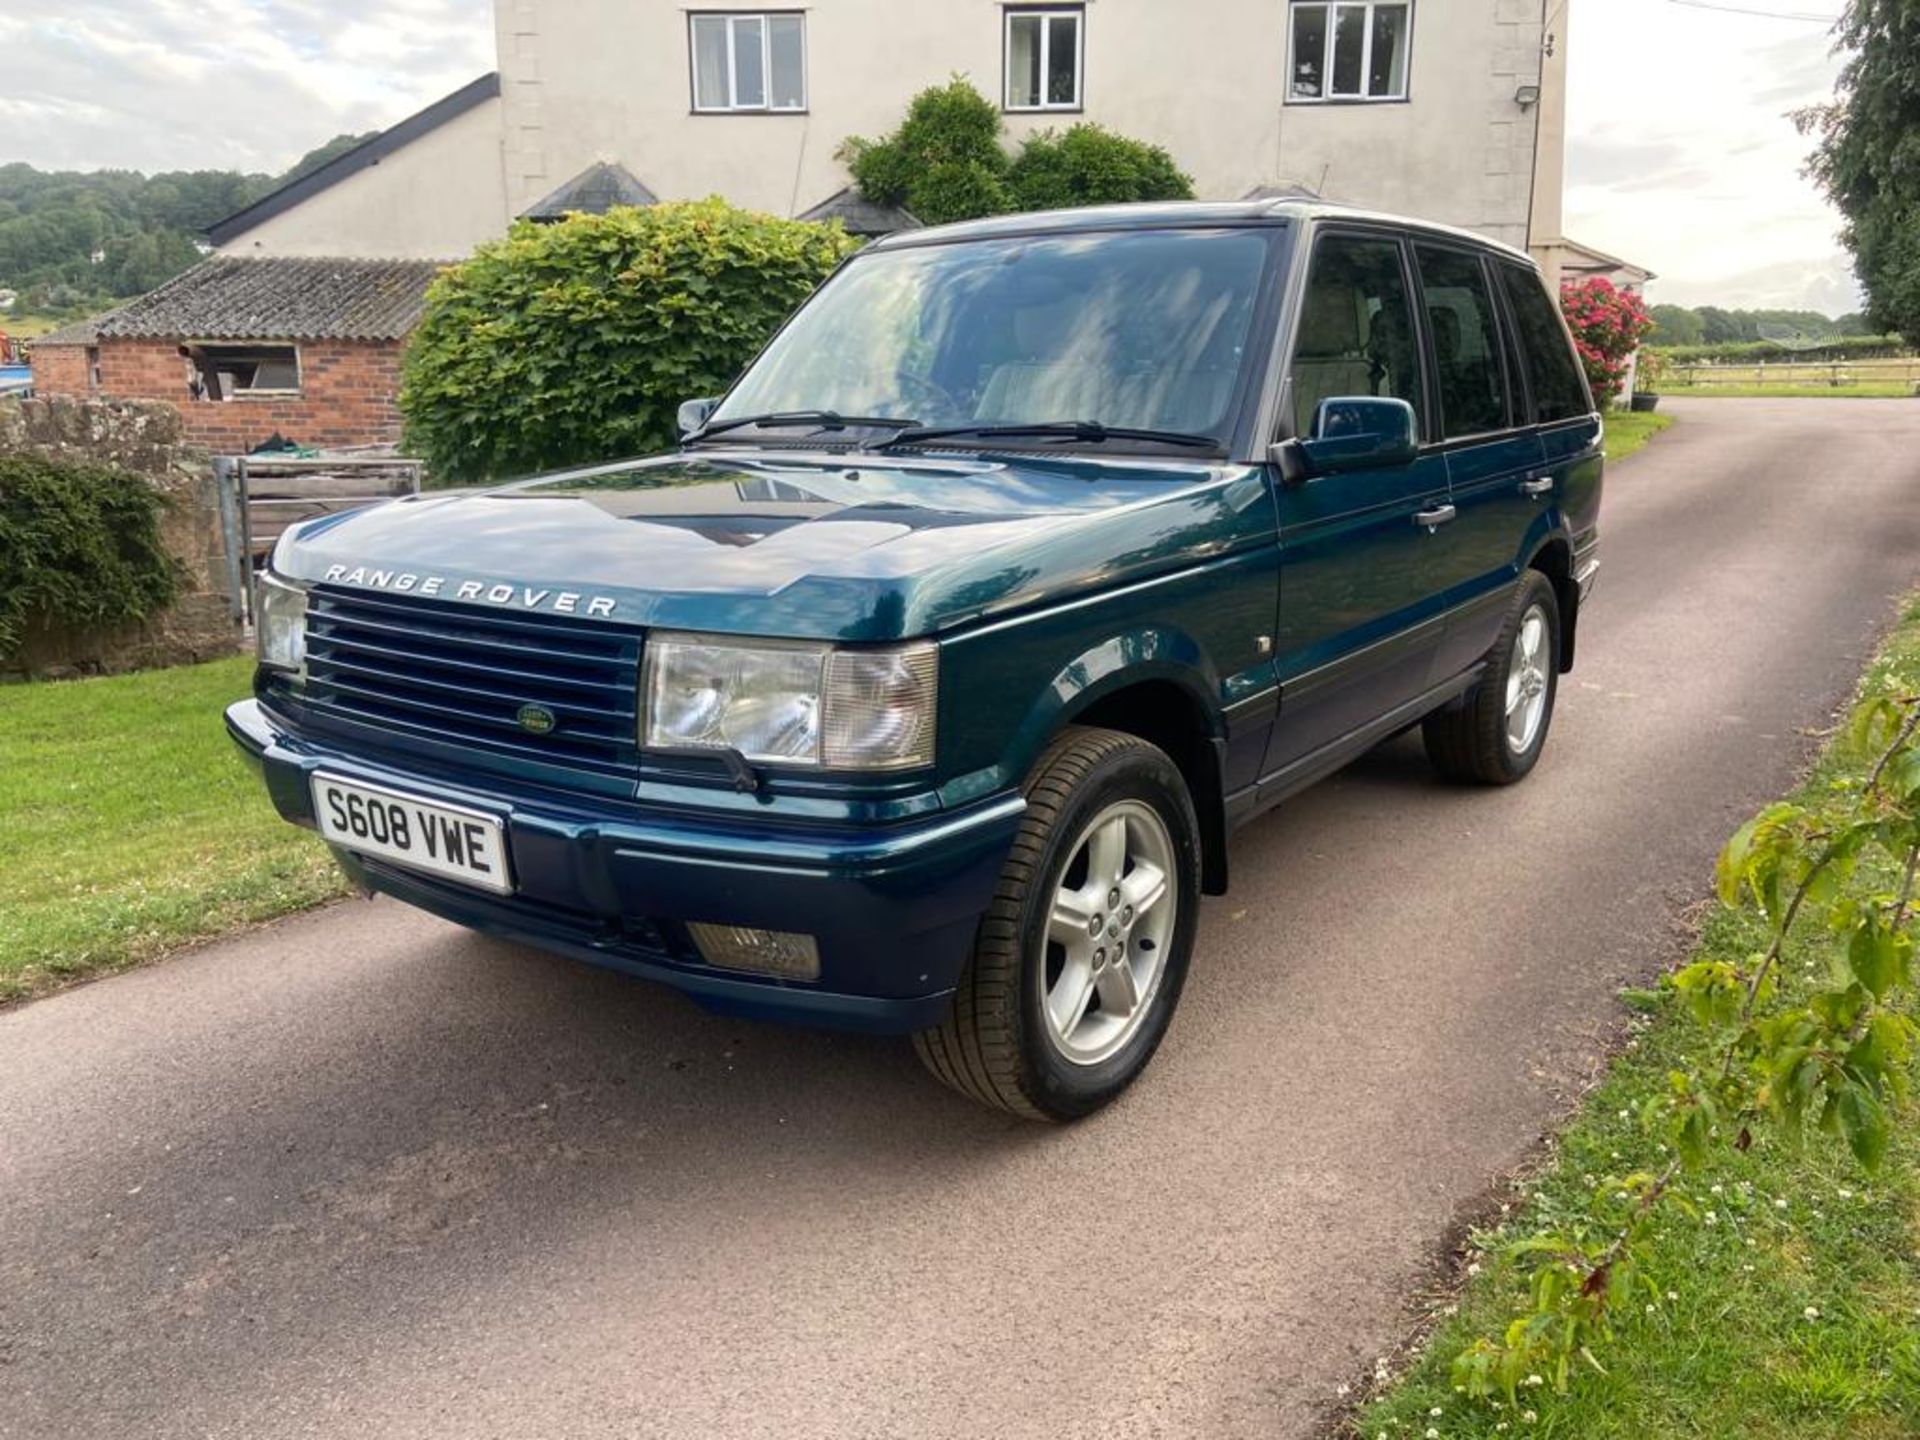 1998 Limited Edition Range Rover P38 - Image 33 of 39